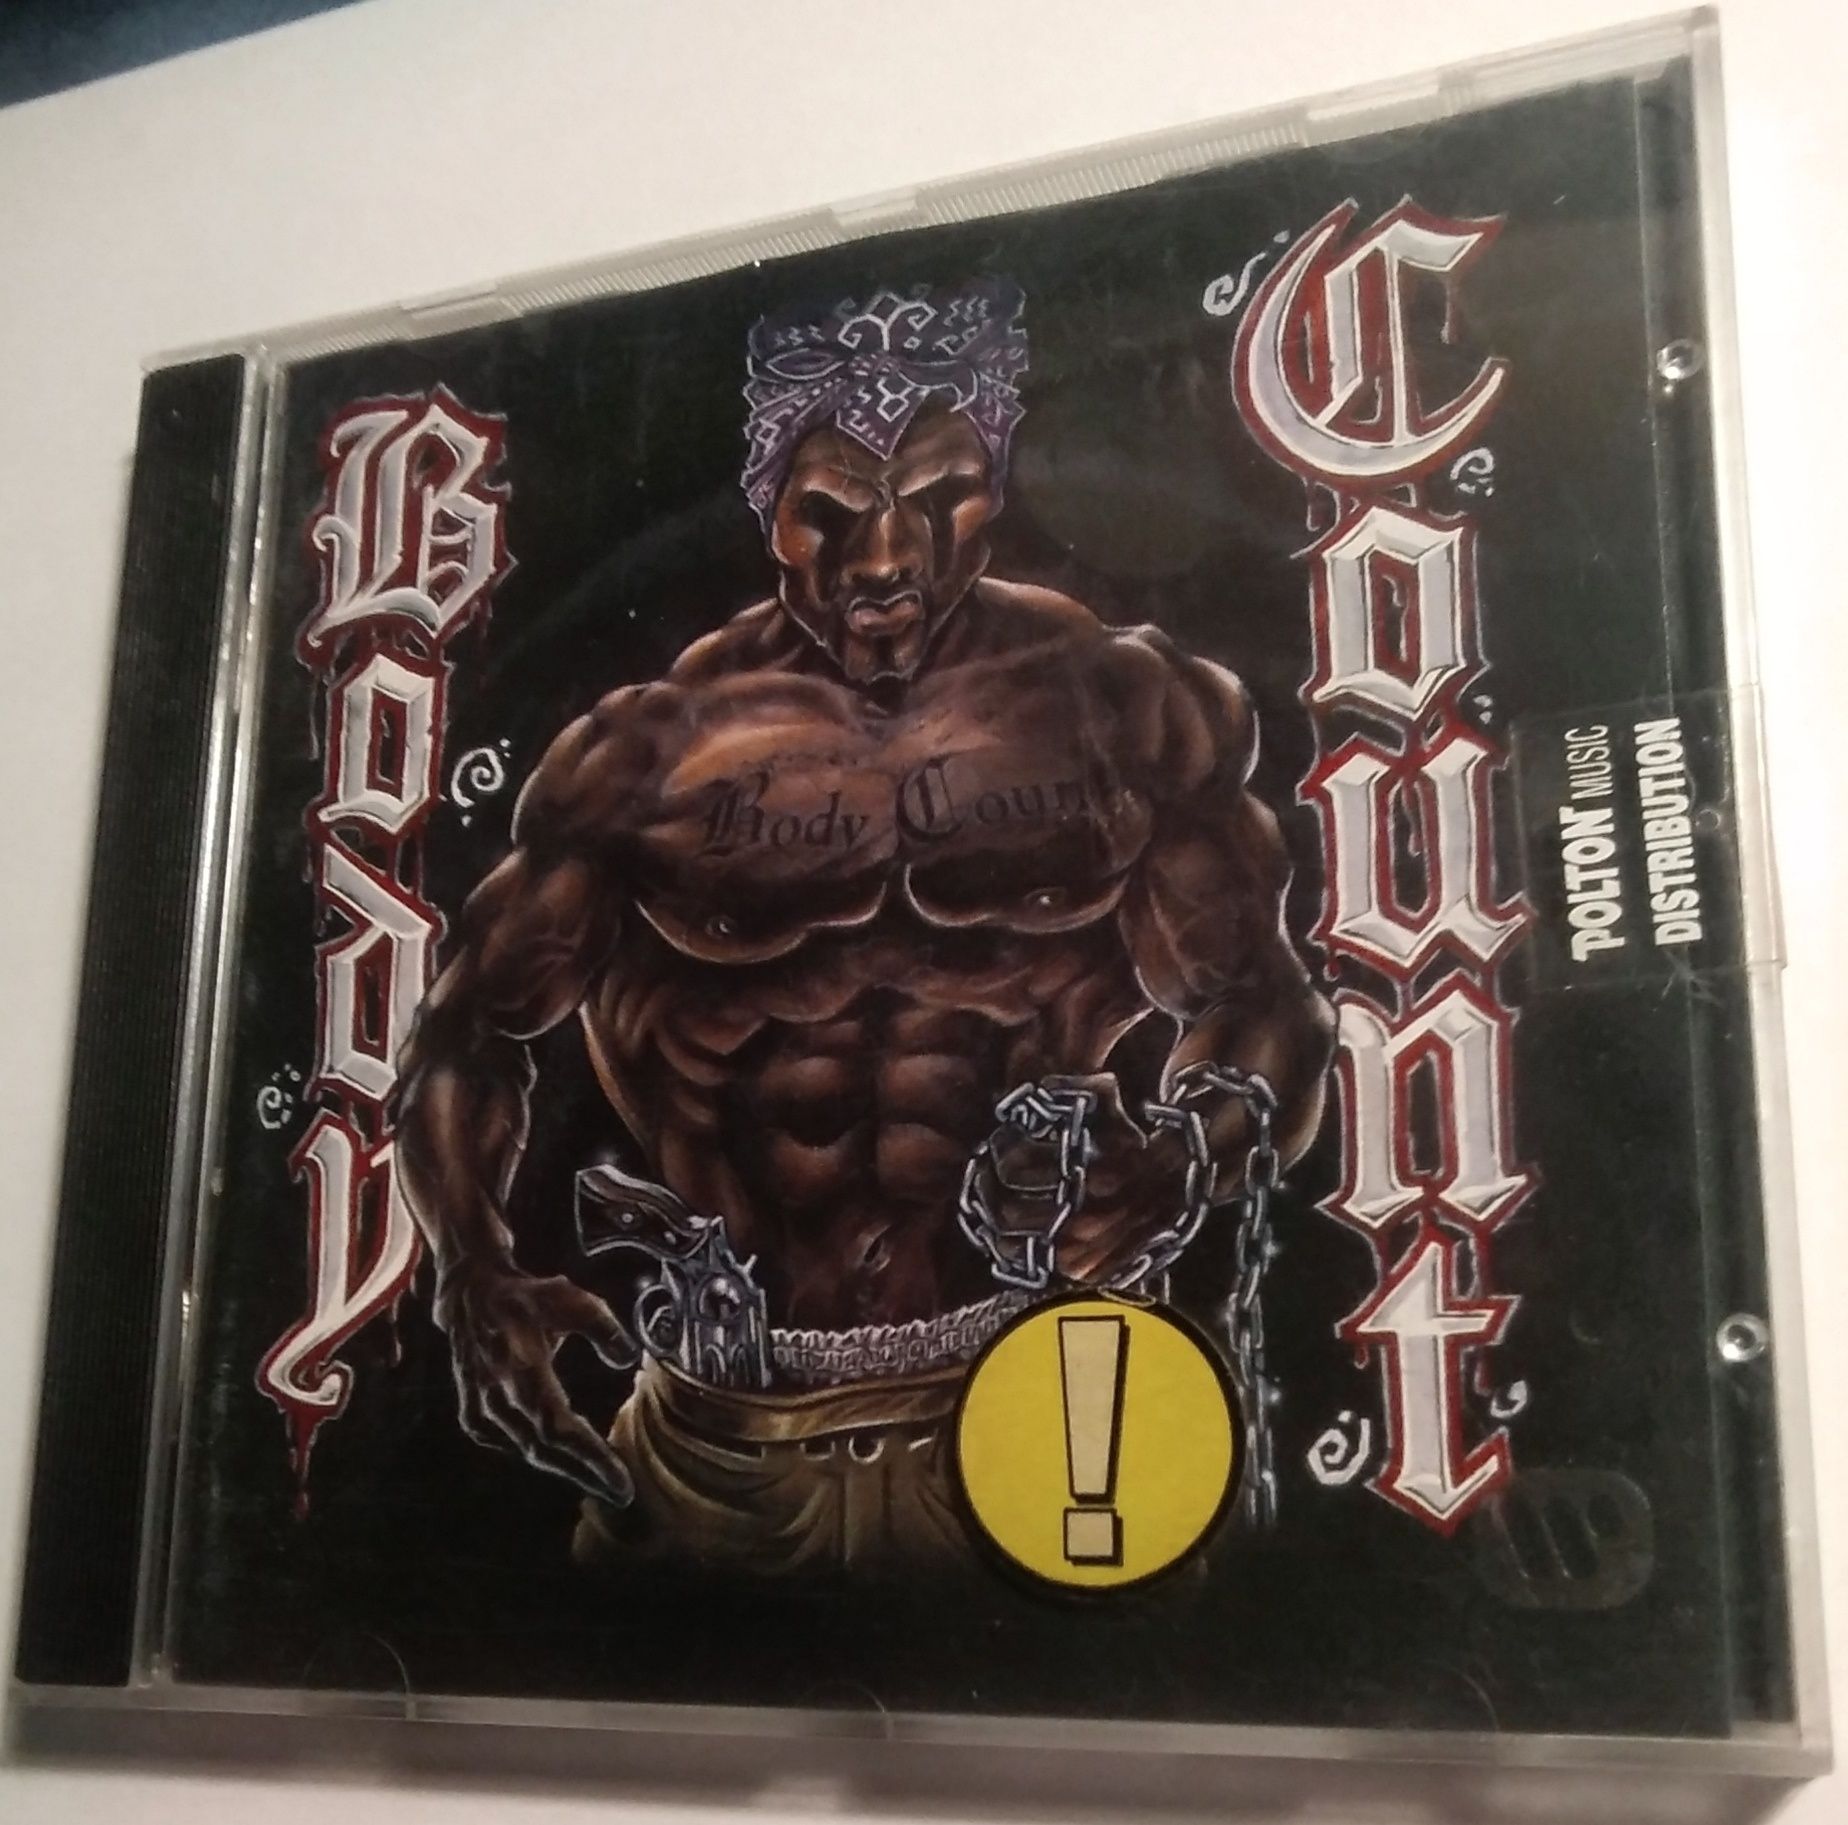 Body Count " Body Count "